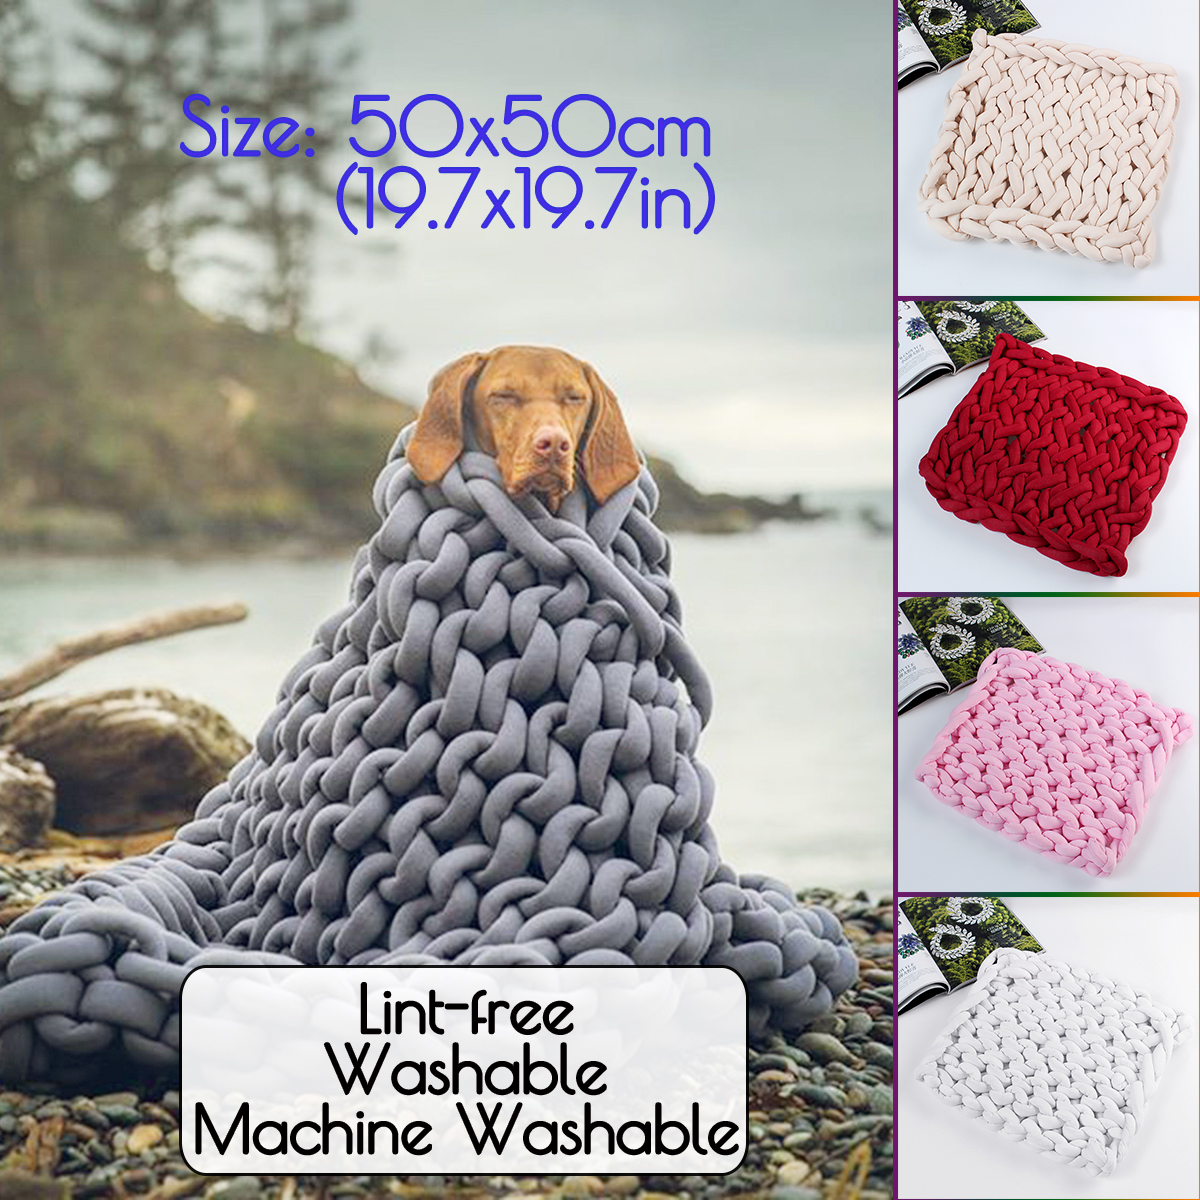 50-x-50cm-Handmade-Knitted-Blanket-Cotton-Soft-Washable-Lint-free-Throw-Multicolored-Thick-Thread-Bl-1637005-1